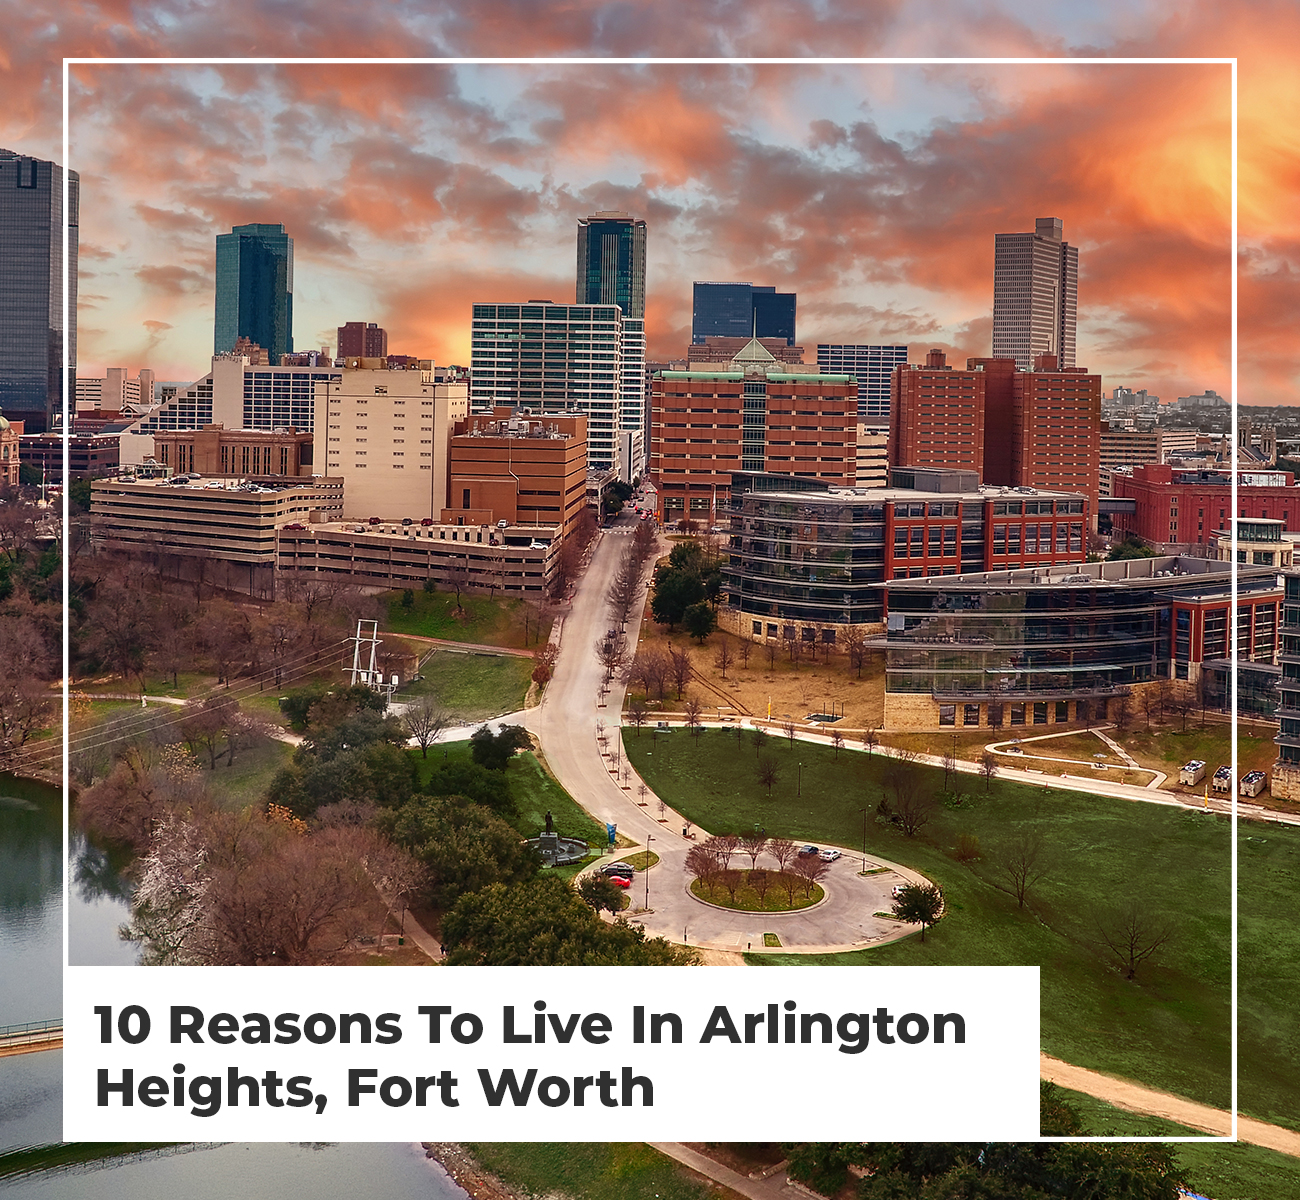 10 Reasons To Live In Arlington Heights, Fort Worth - Main Image